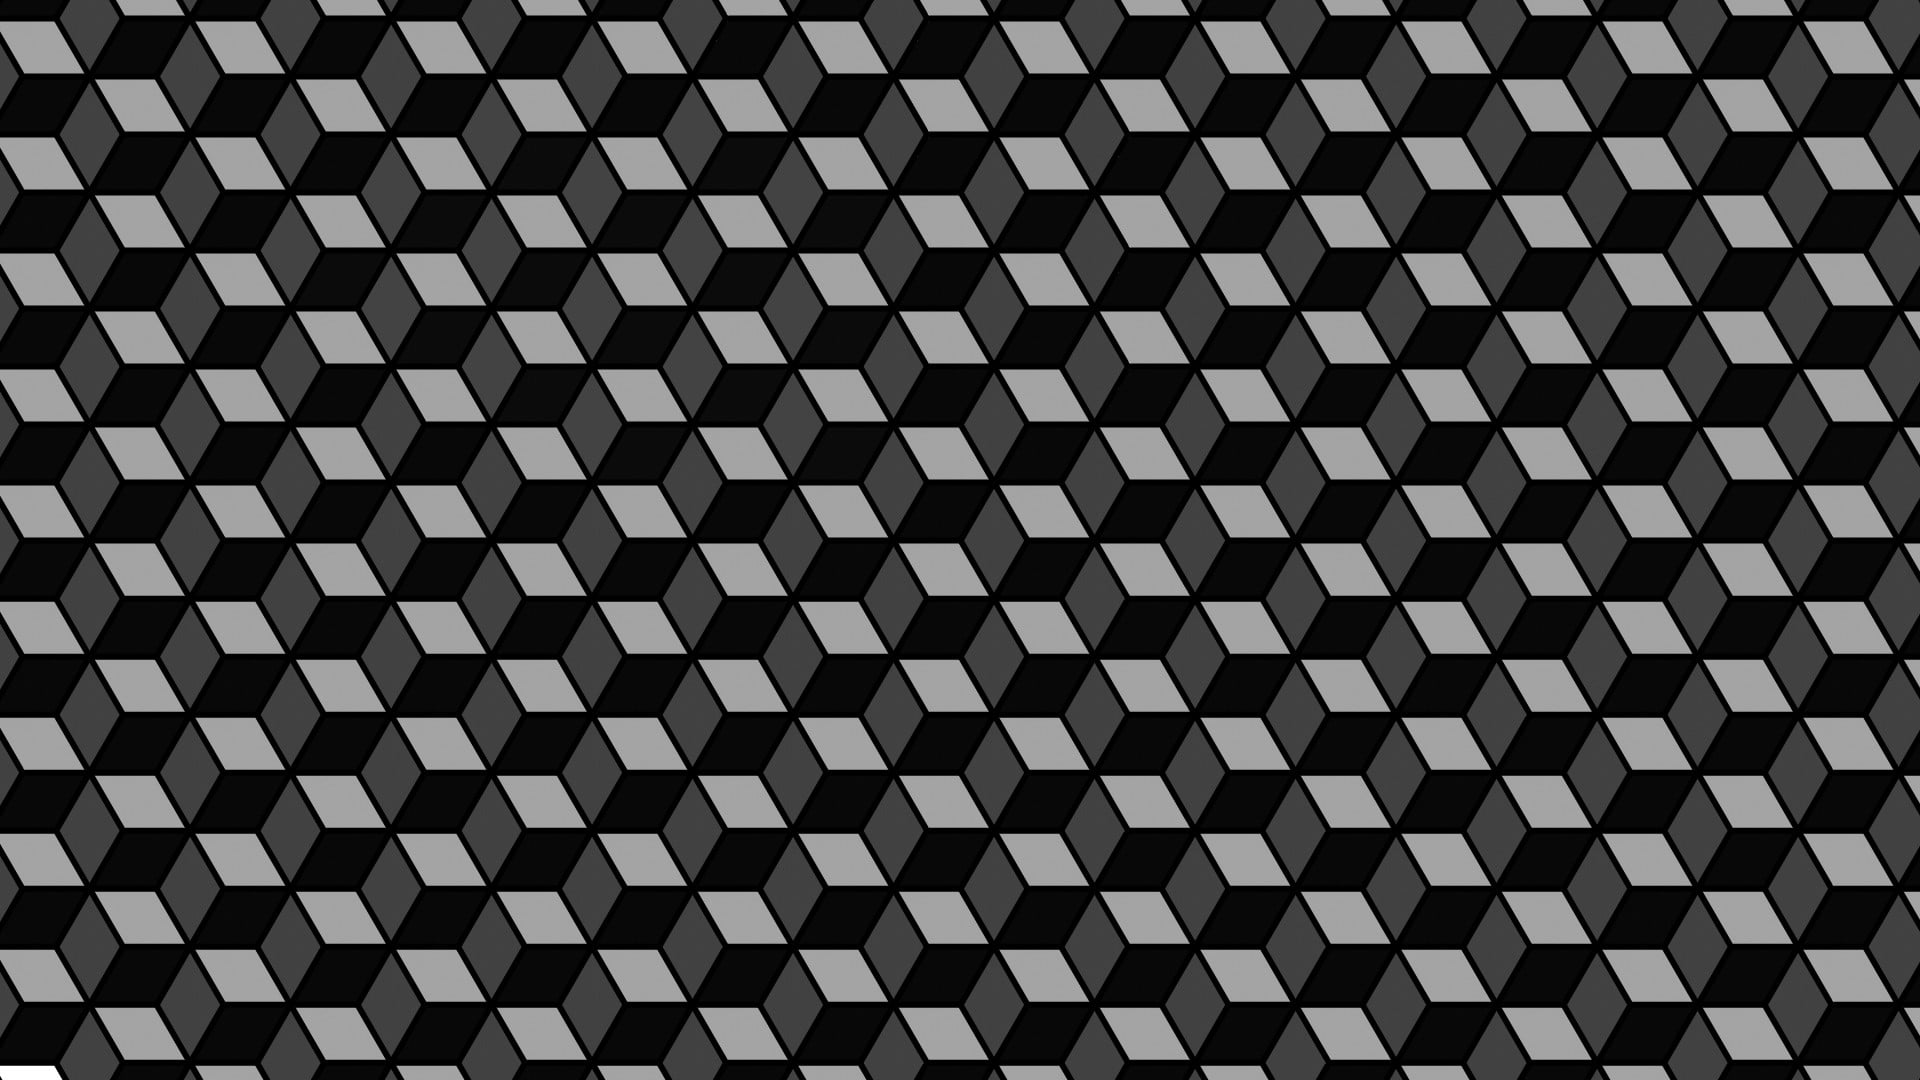 pattern, optical illusion, cube, backgrounds, full frame, design